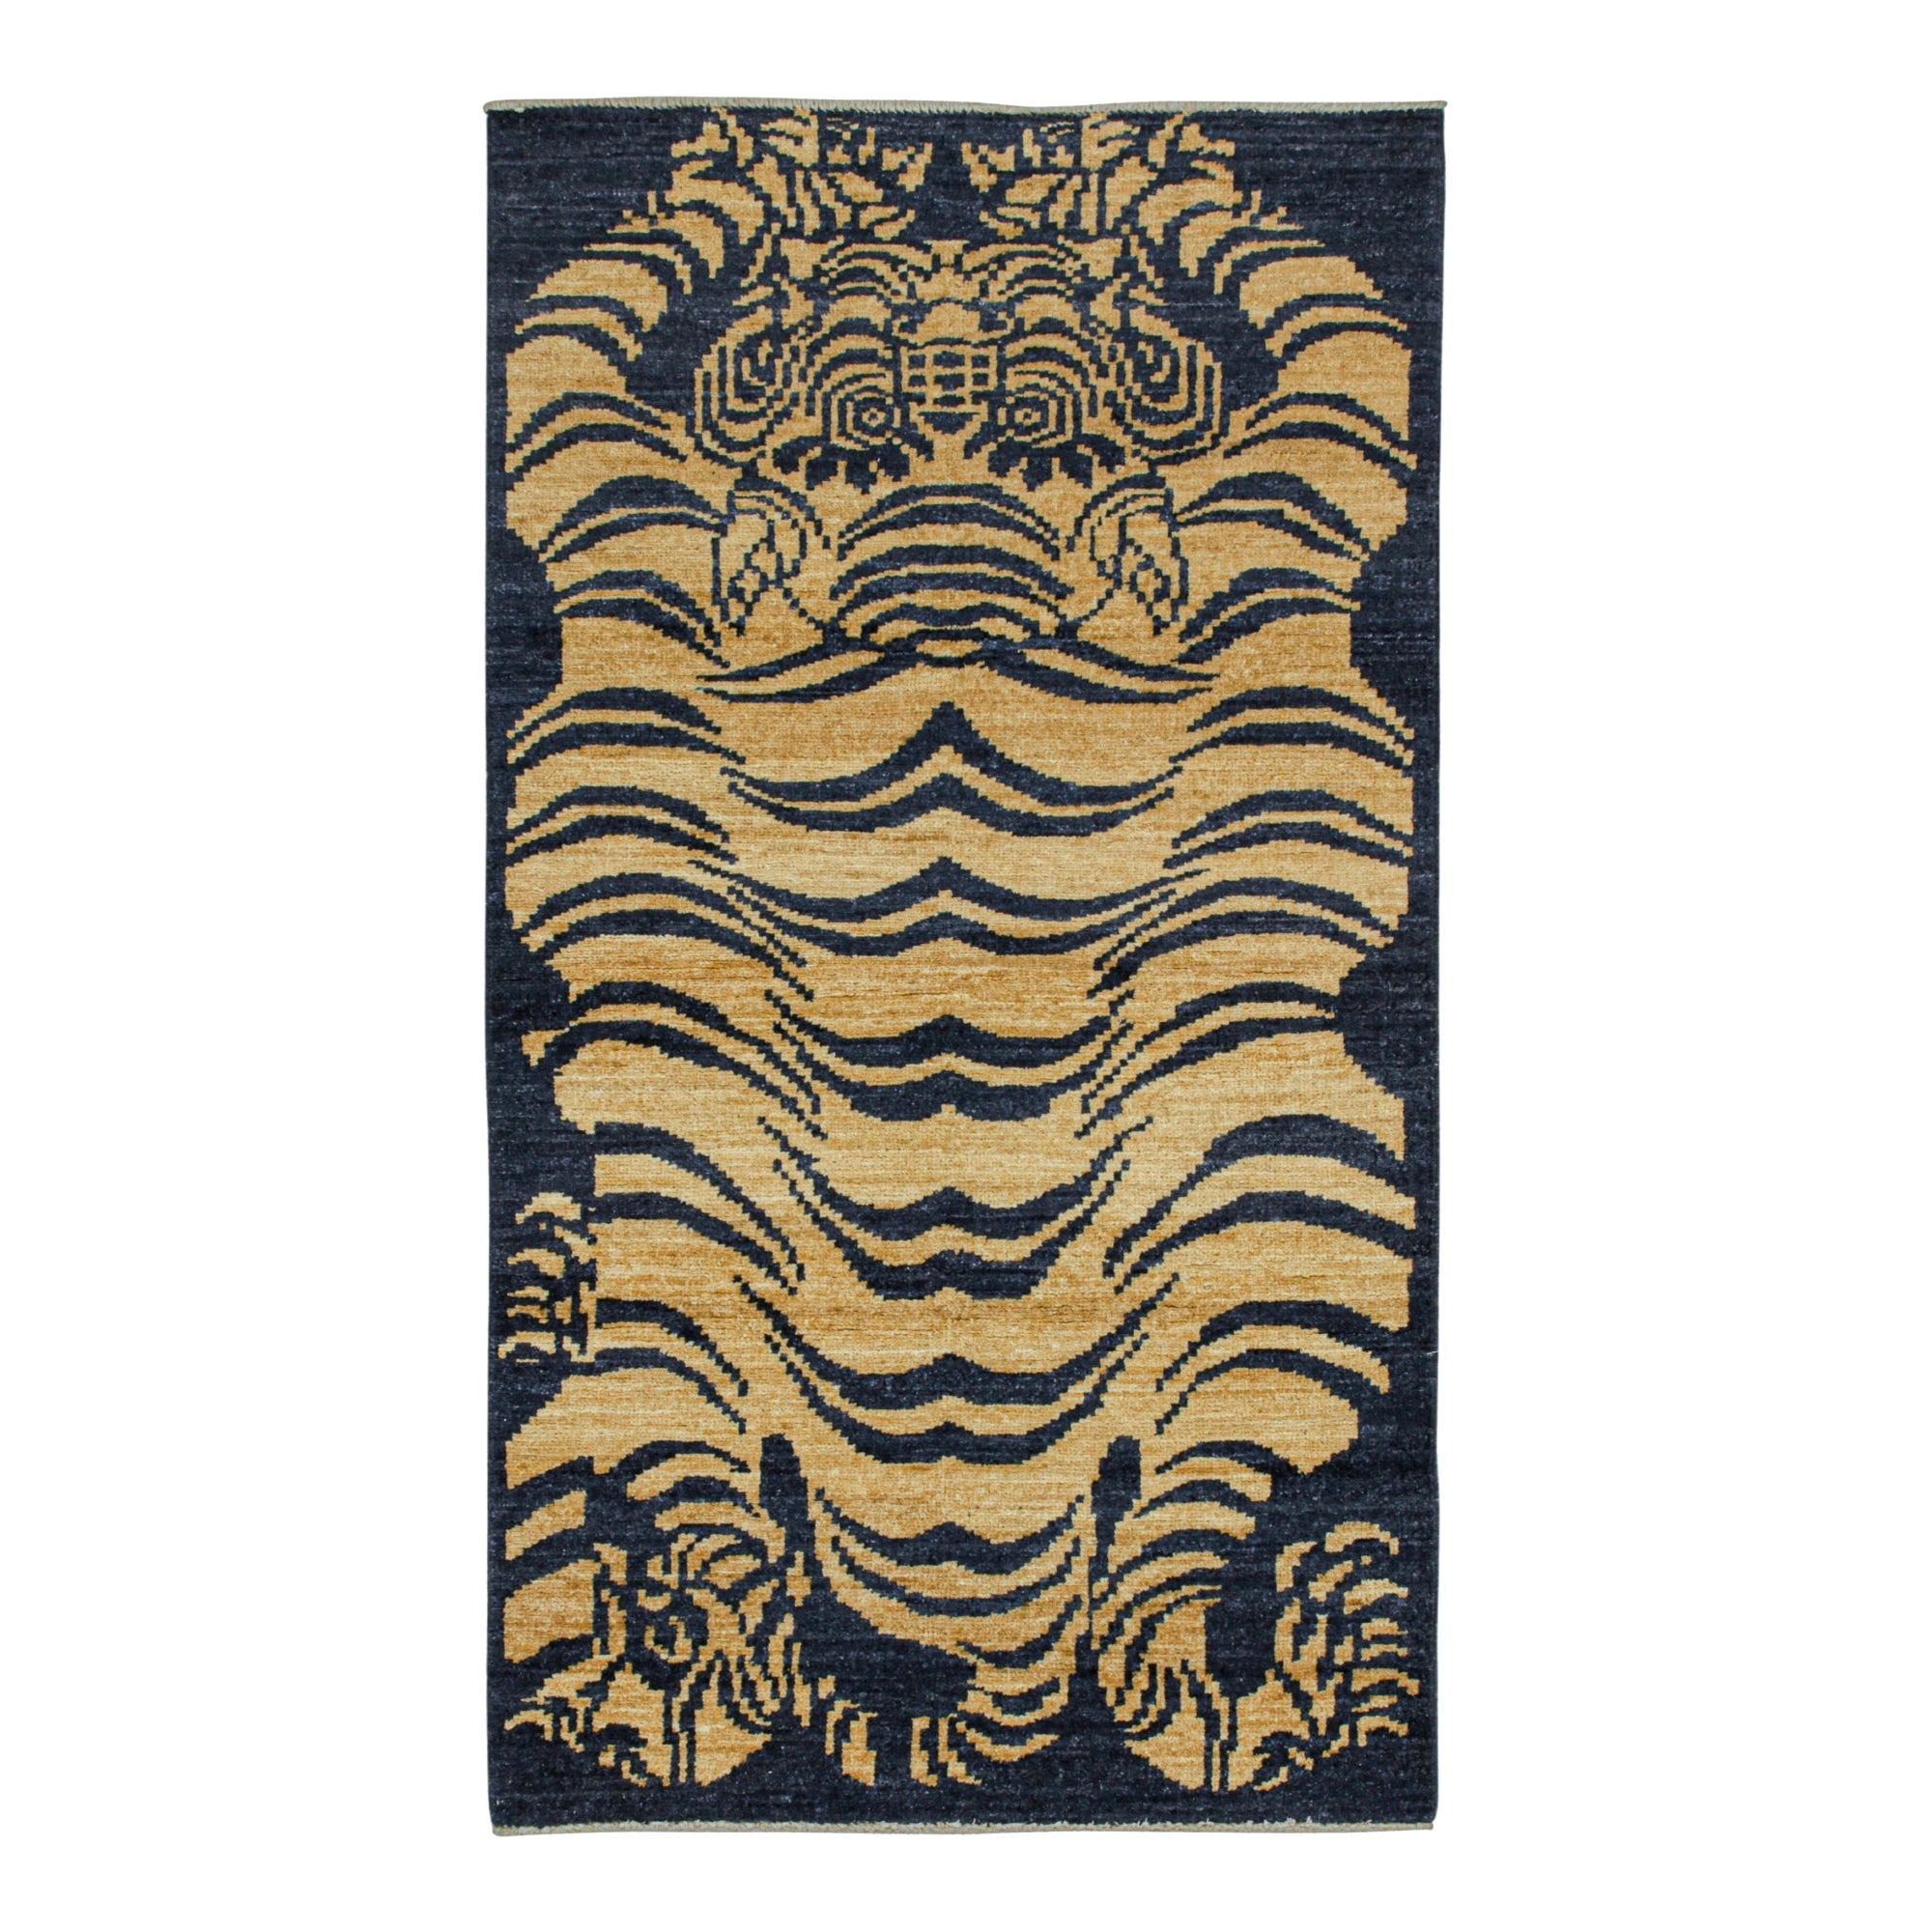 Tapis & Kilim's Classic Style Tiger Runner in Navy Blue and Gold Pictorial (en anglais) en vente